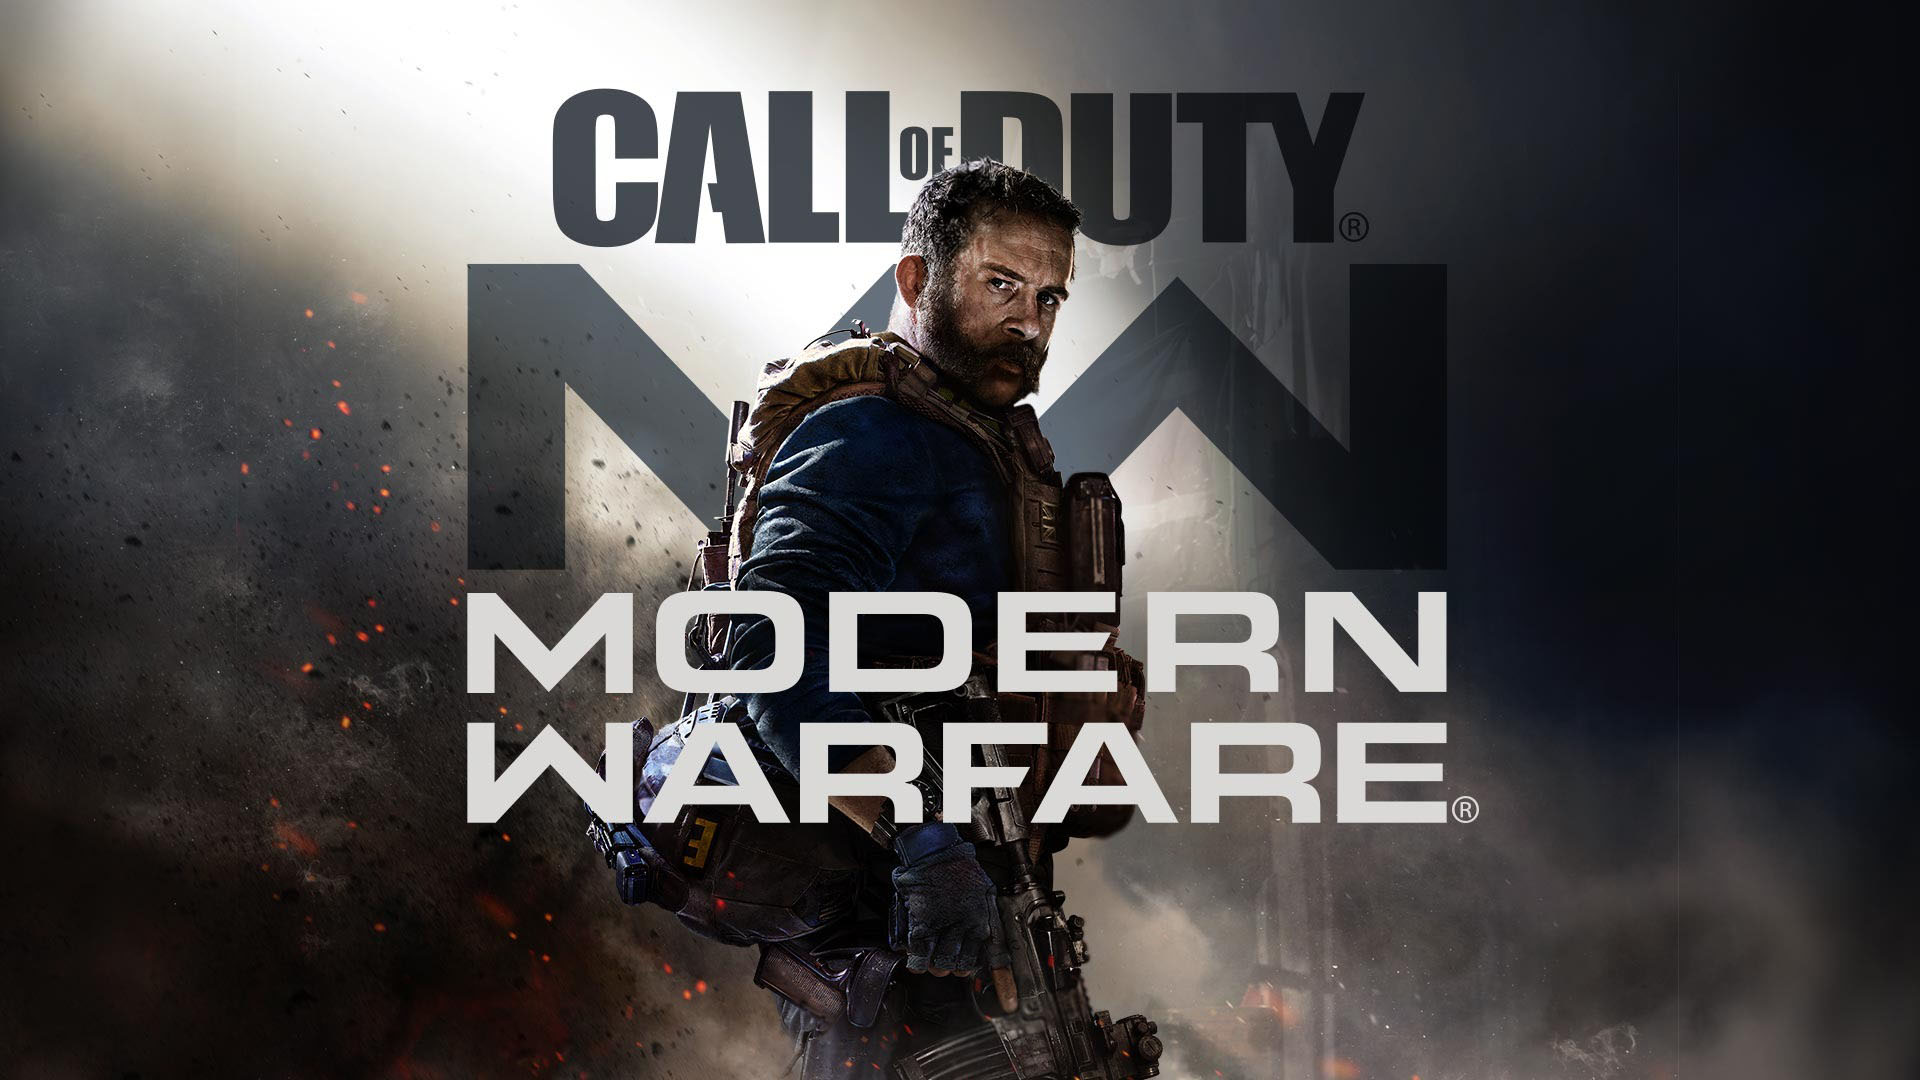 Call of Duty: Modern Warfare is the sixteenth entry in the Call of Duty series and is also a reboot of the Modern Warfare series. The story has been d...